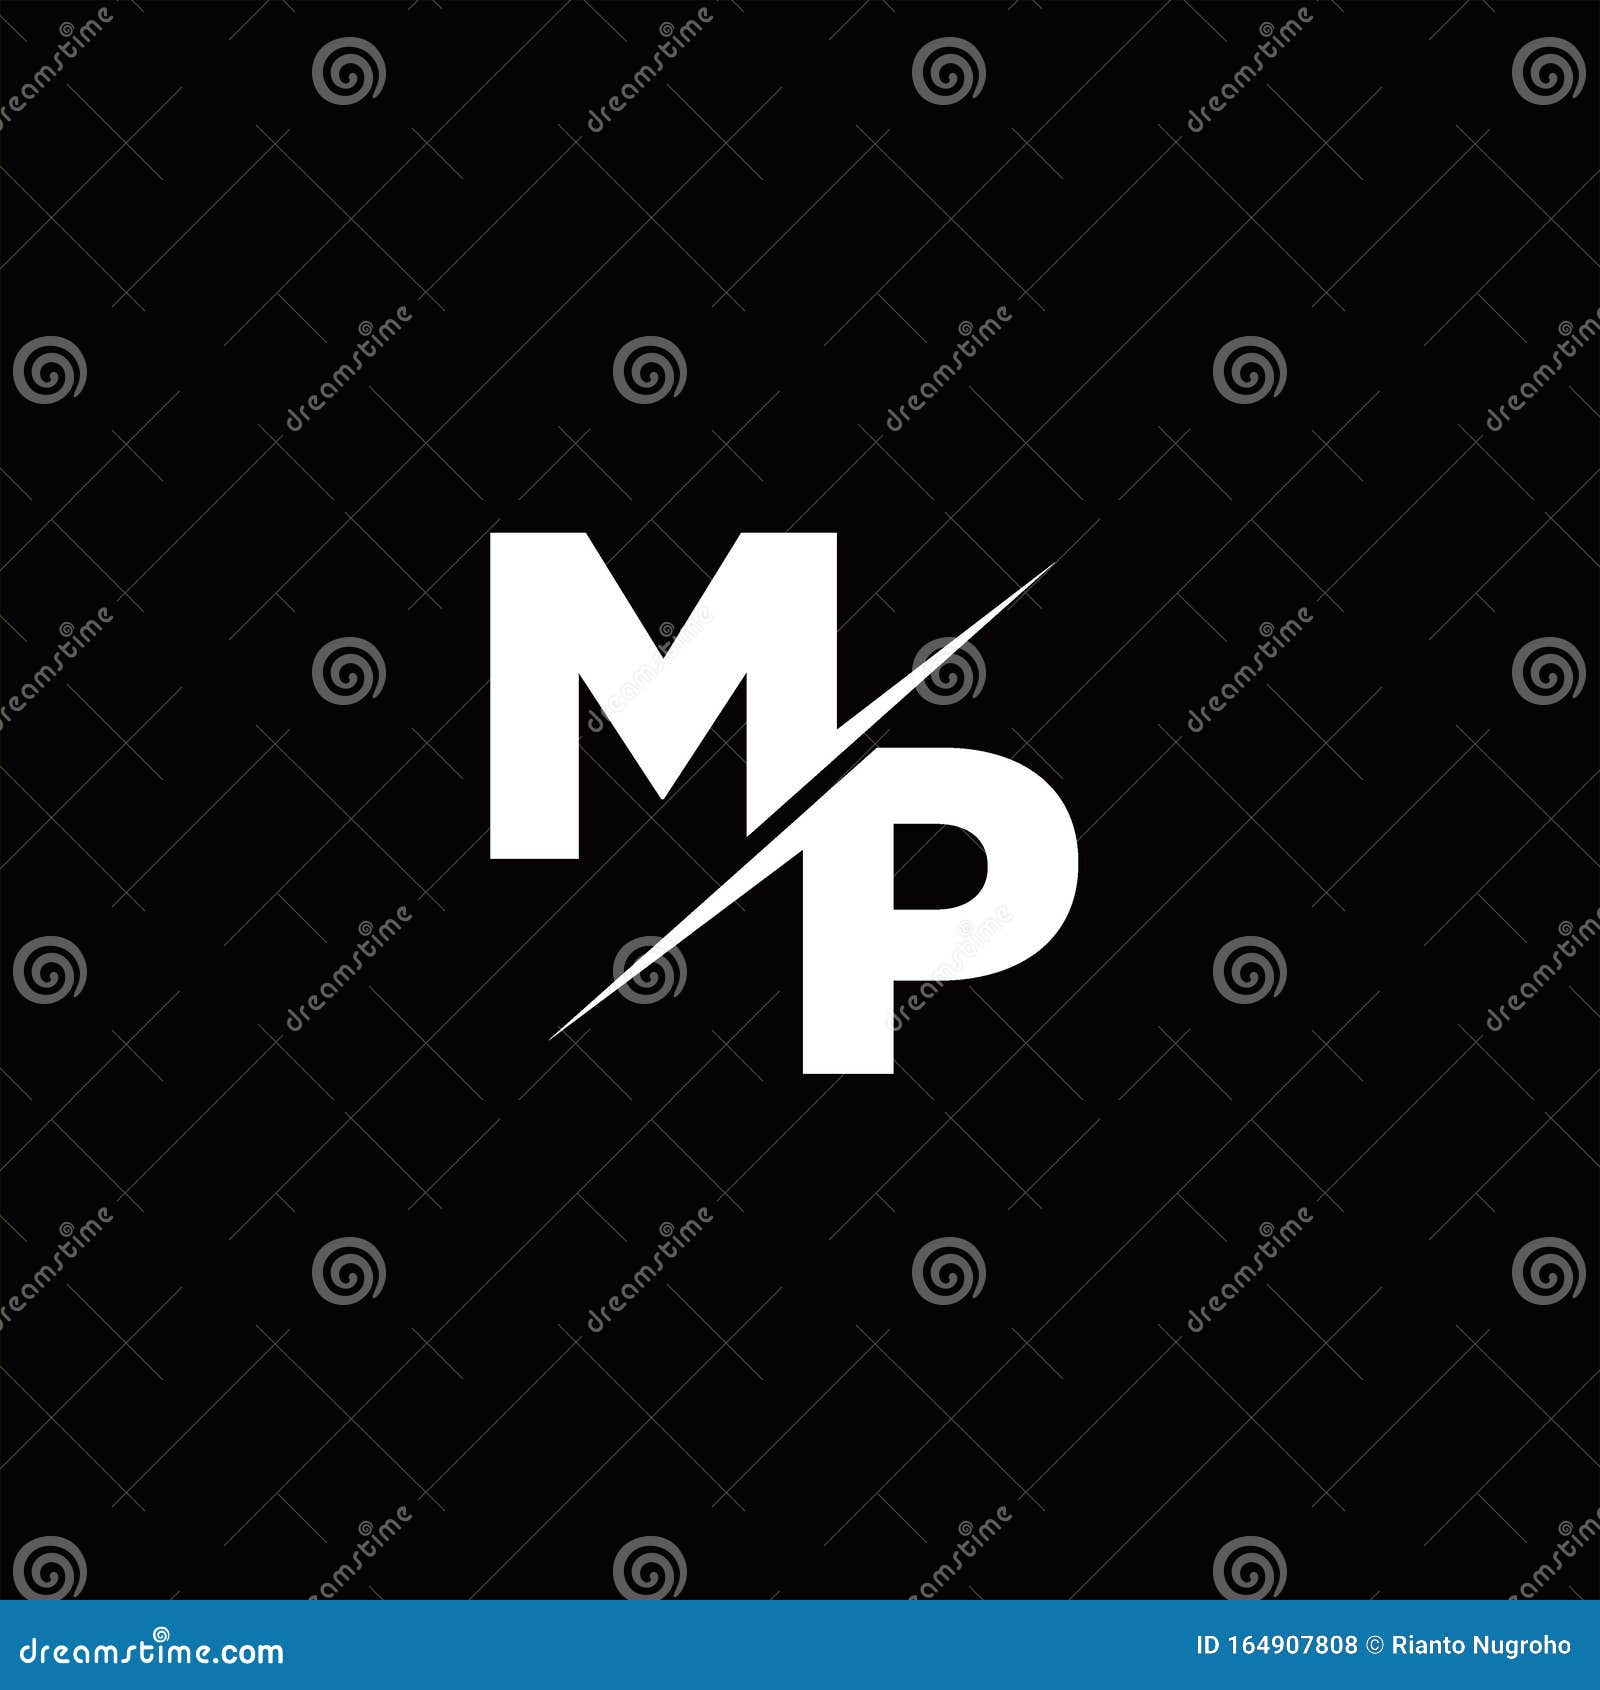 Pm Logo PNG, Vector, PSD, and Clipart With Transparent Background